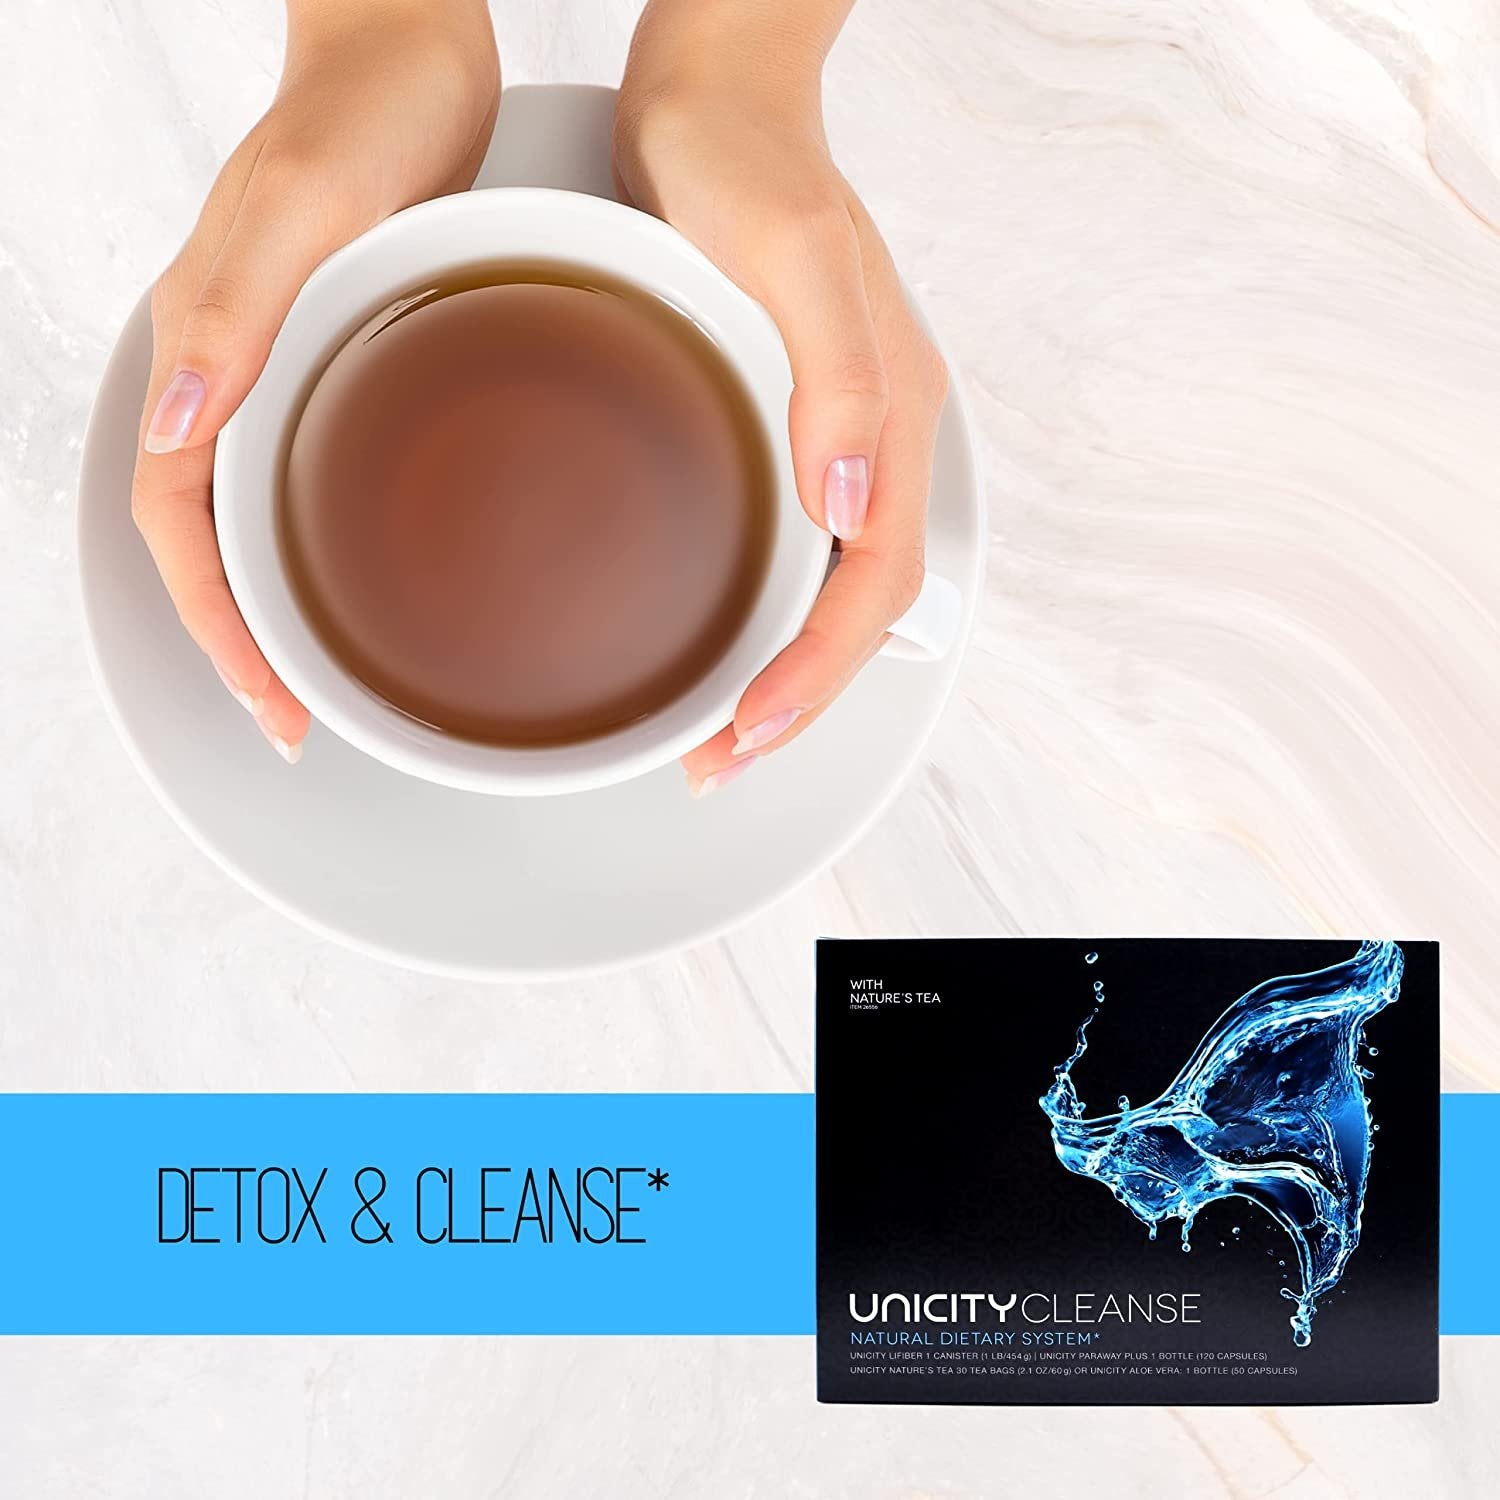 Unicity Cleanse with Nature's Tea Natural Dietary System - Healthy Detox Cleanse Kit of Unicity LiFiber Intestinal Cleanse, Paraway Plus Body Cleanse, and Nature's Tea Gastrointestinal Support